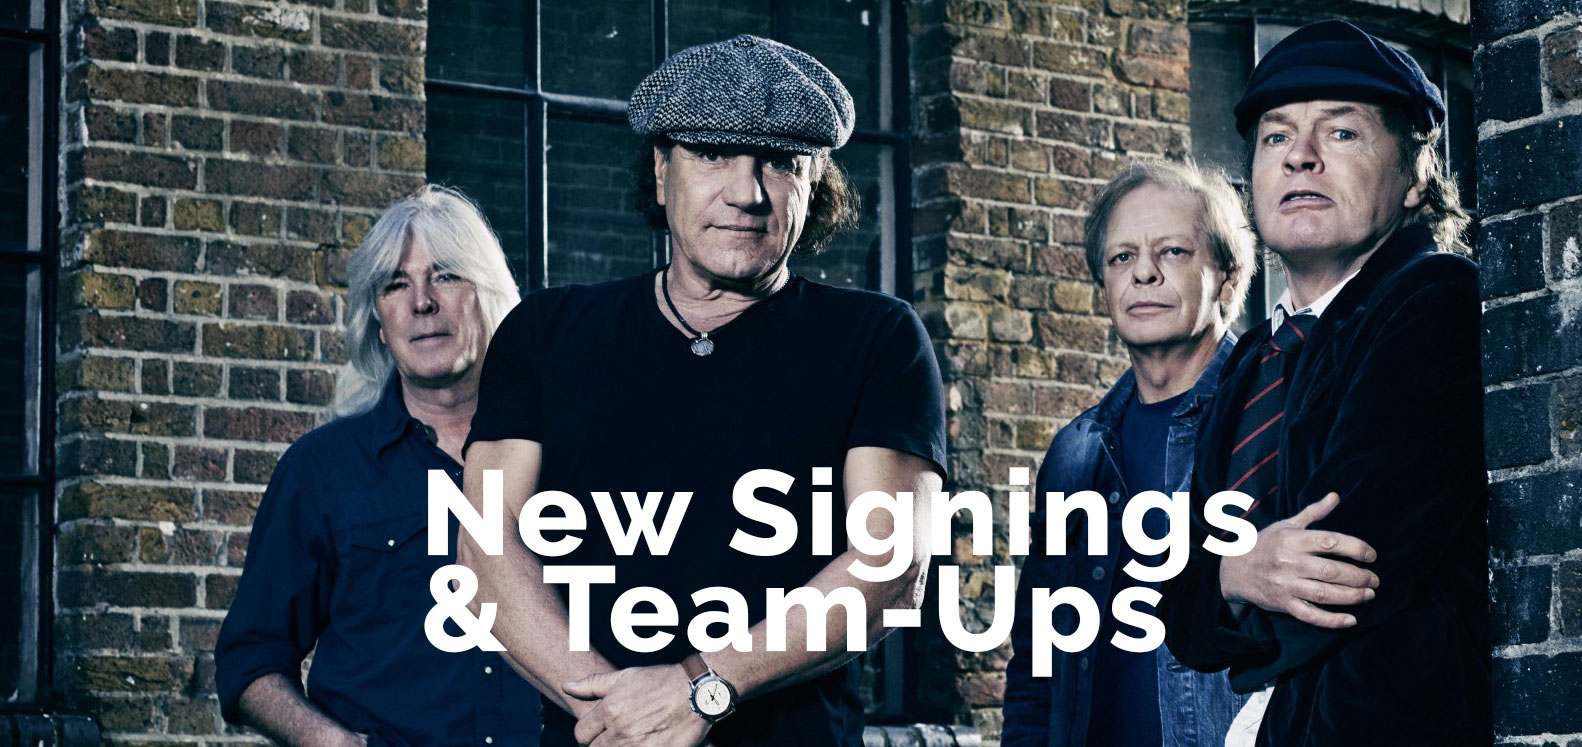 New Signings & Team-Ups: Beats uses AC/DC to aim at NFL fans; SME Australia brings in Jason Aldean; Airbnb signs on for Mardi Gras